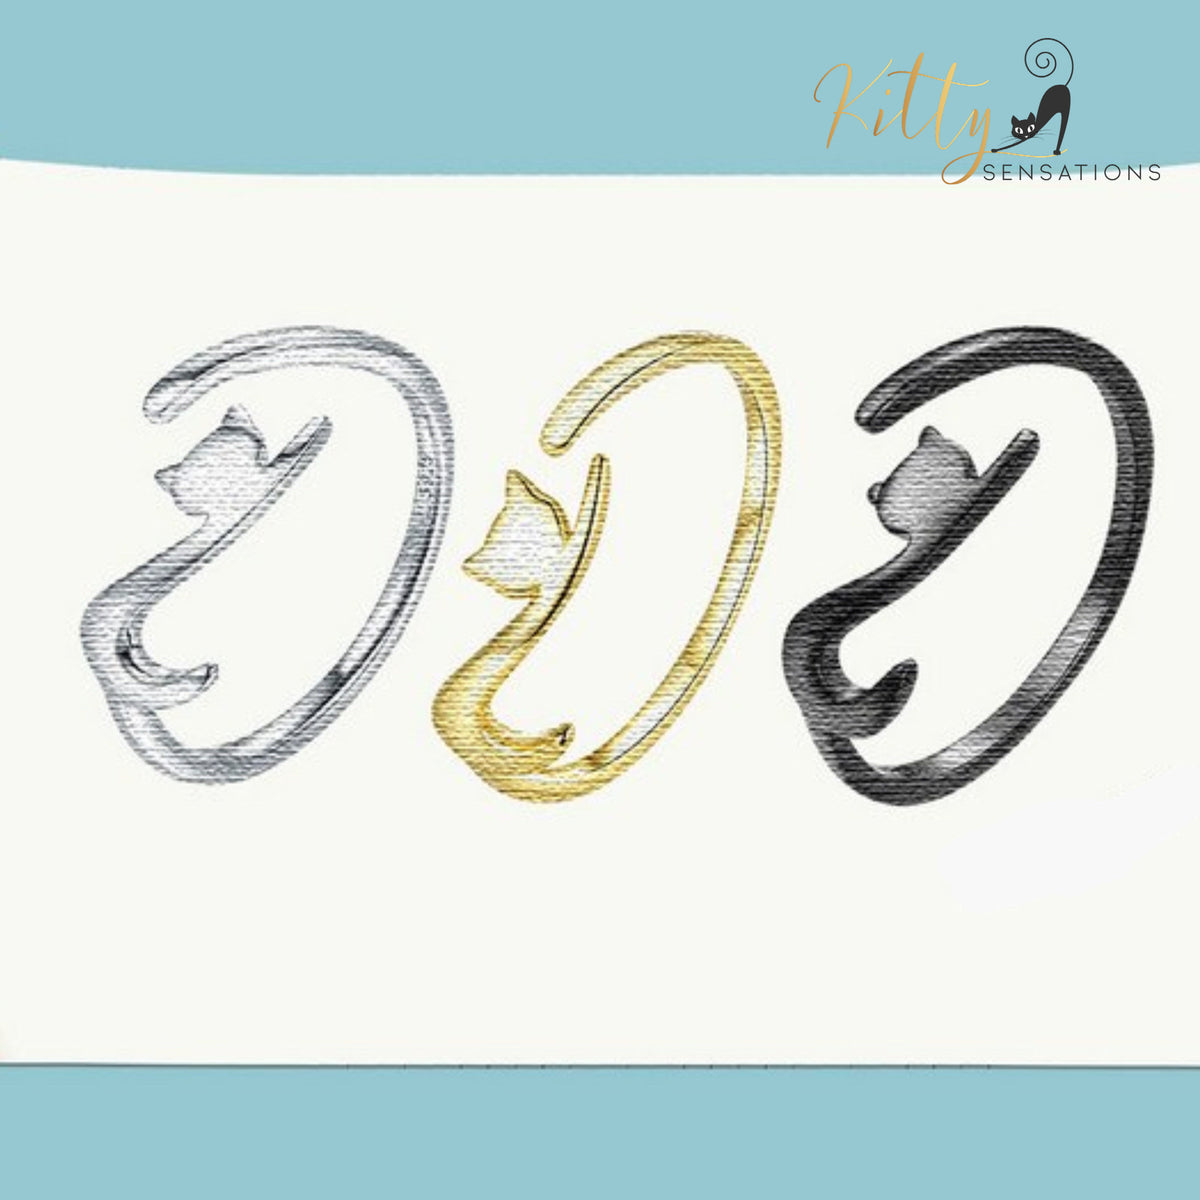 www.KittySensations.com: Elegant Cat Ring In Solid 925 Sterling Silver (Silver, Gold, or Black Gold Finish) ($44.52): https://www.kittysensations.com/products/copy-of-elegant-cat-ring-in-solid-925-sterling-silver